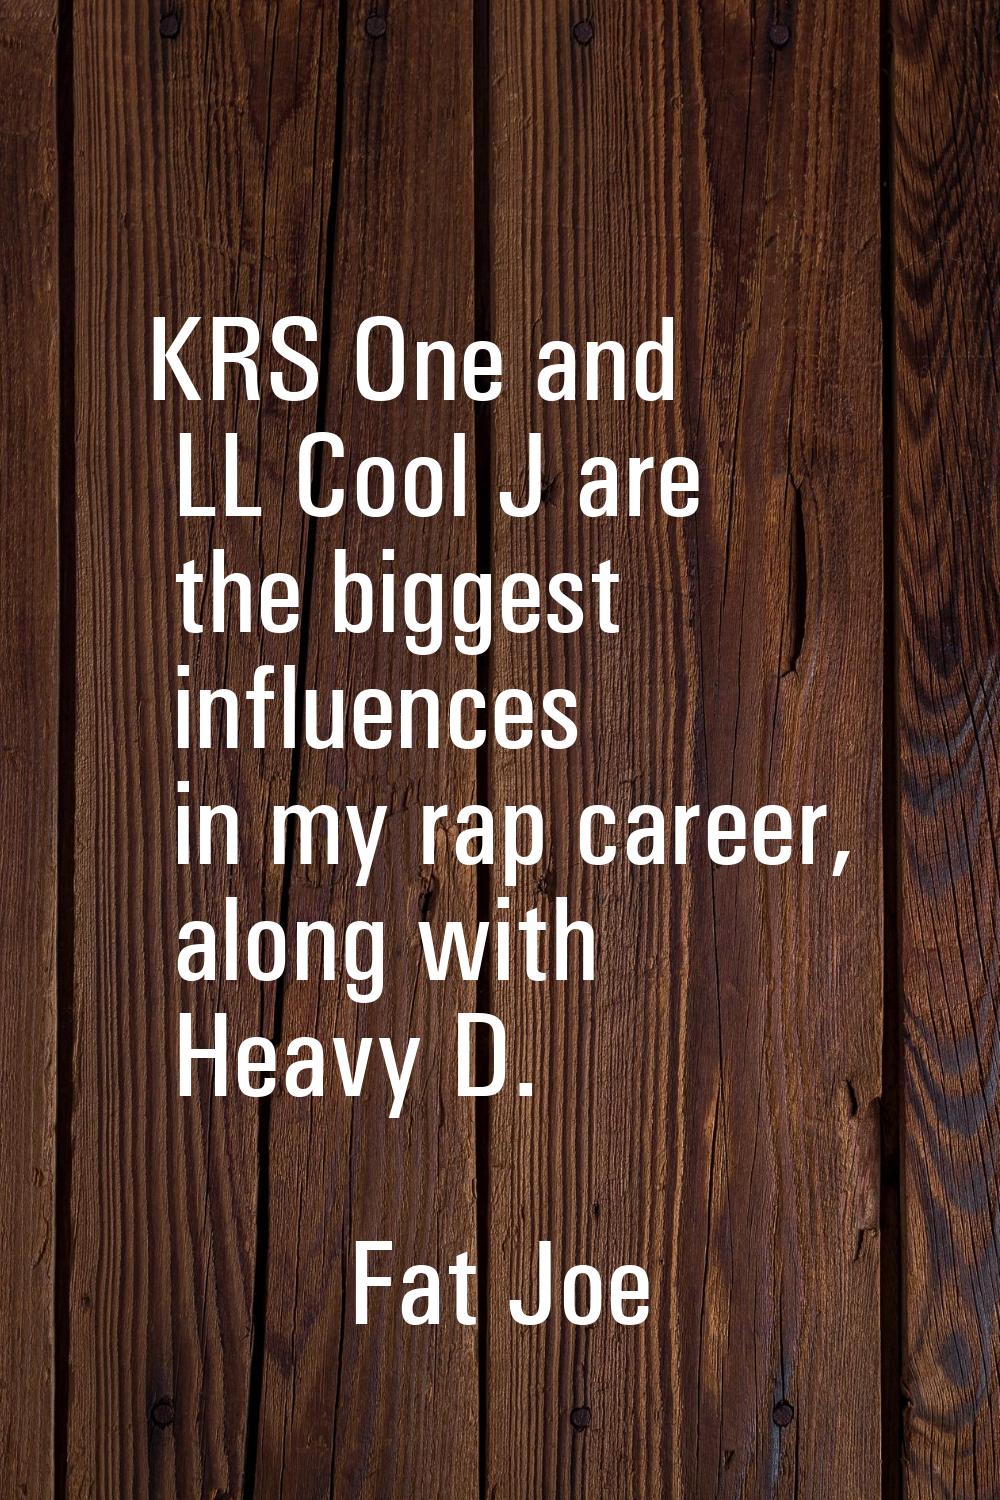 KRS One and LL Cool J are the biggest influences in my rap career, along with Heavy D.